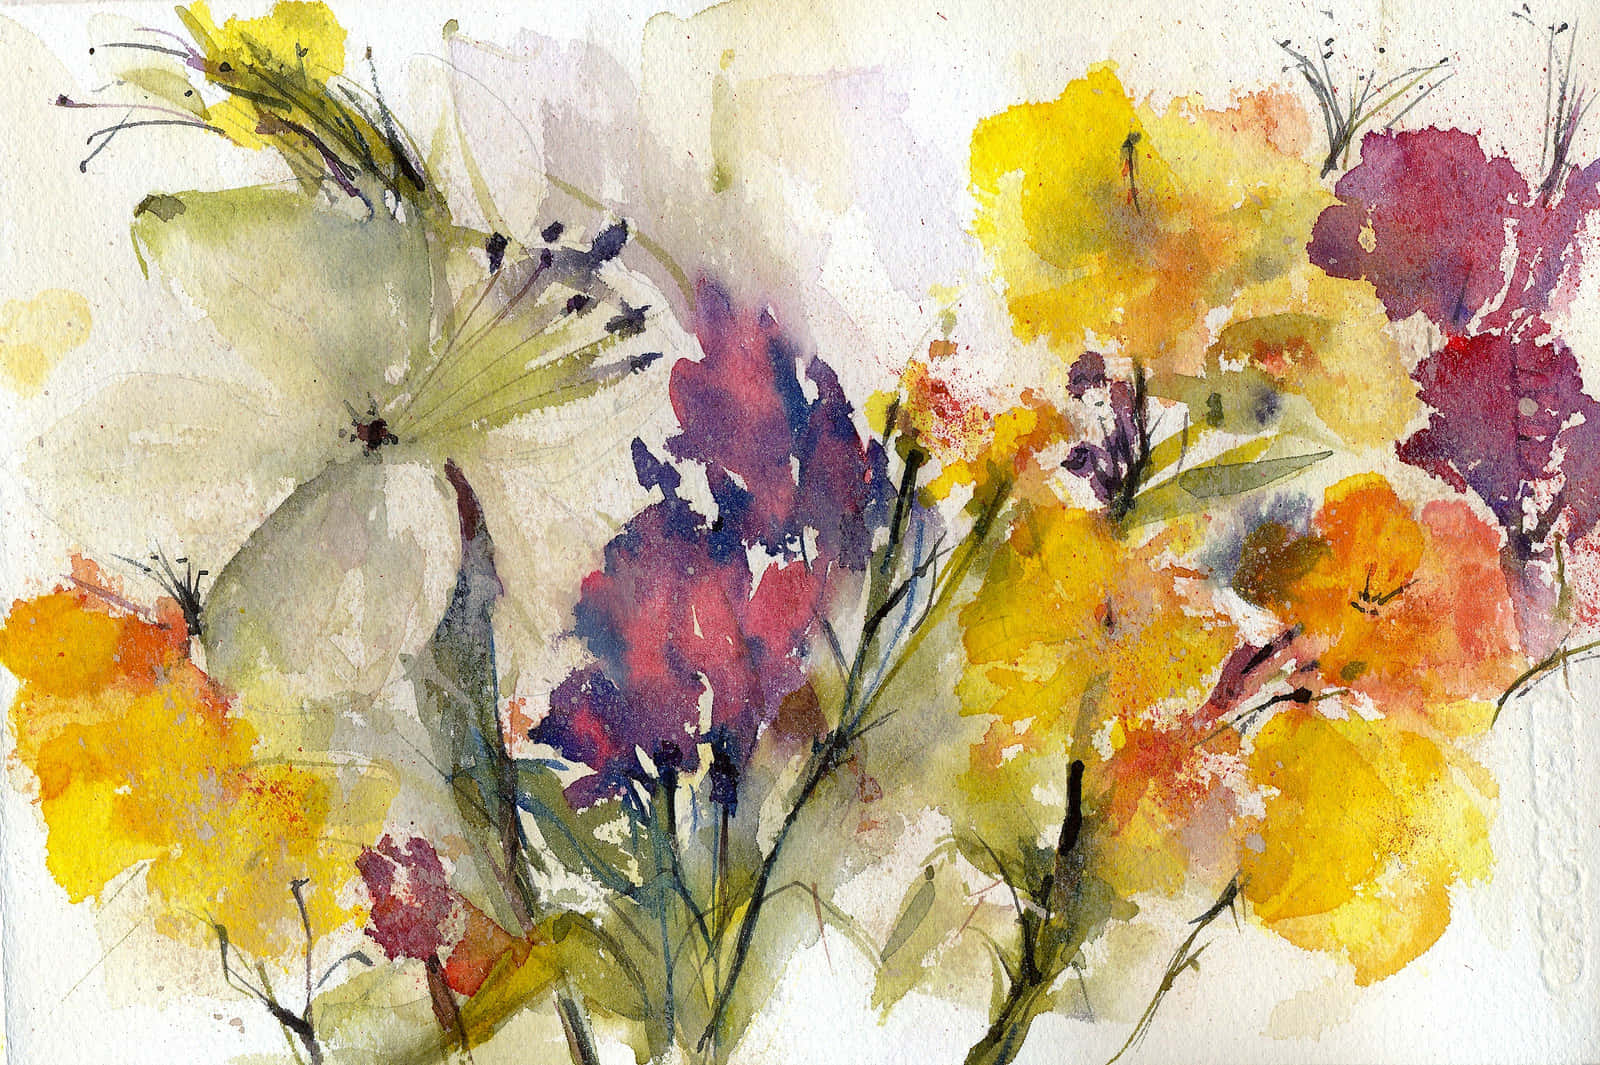 Let your imagination flow with this vibrant watercolor painting